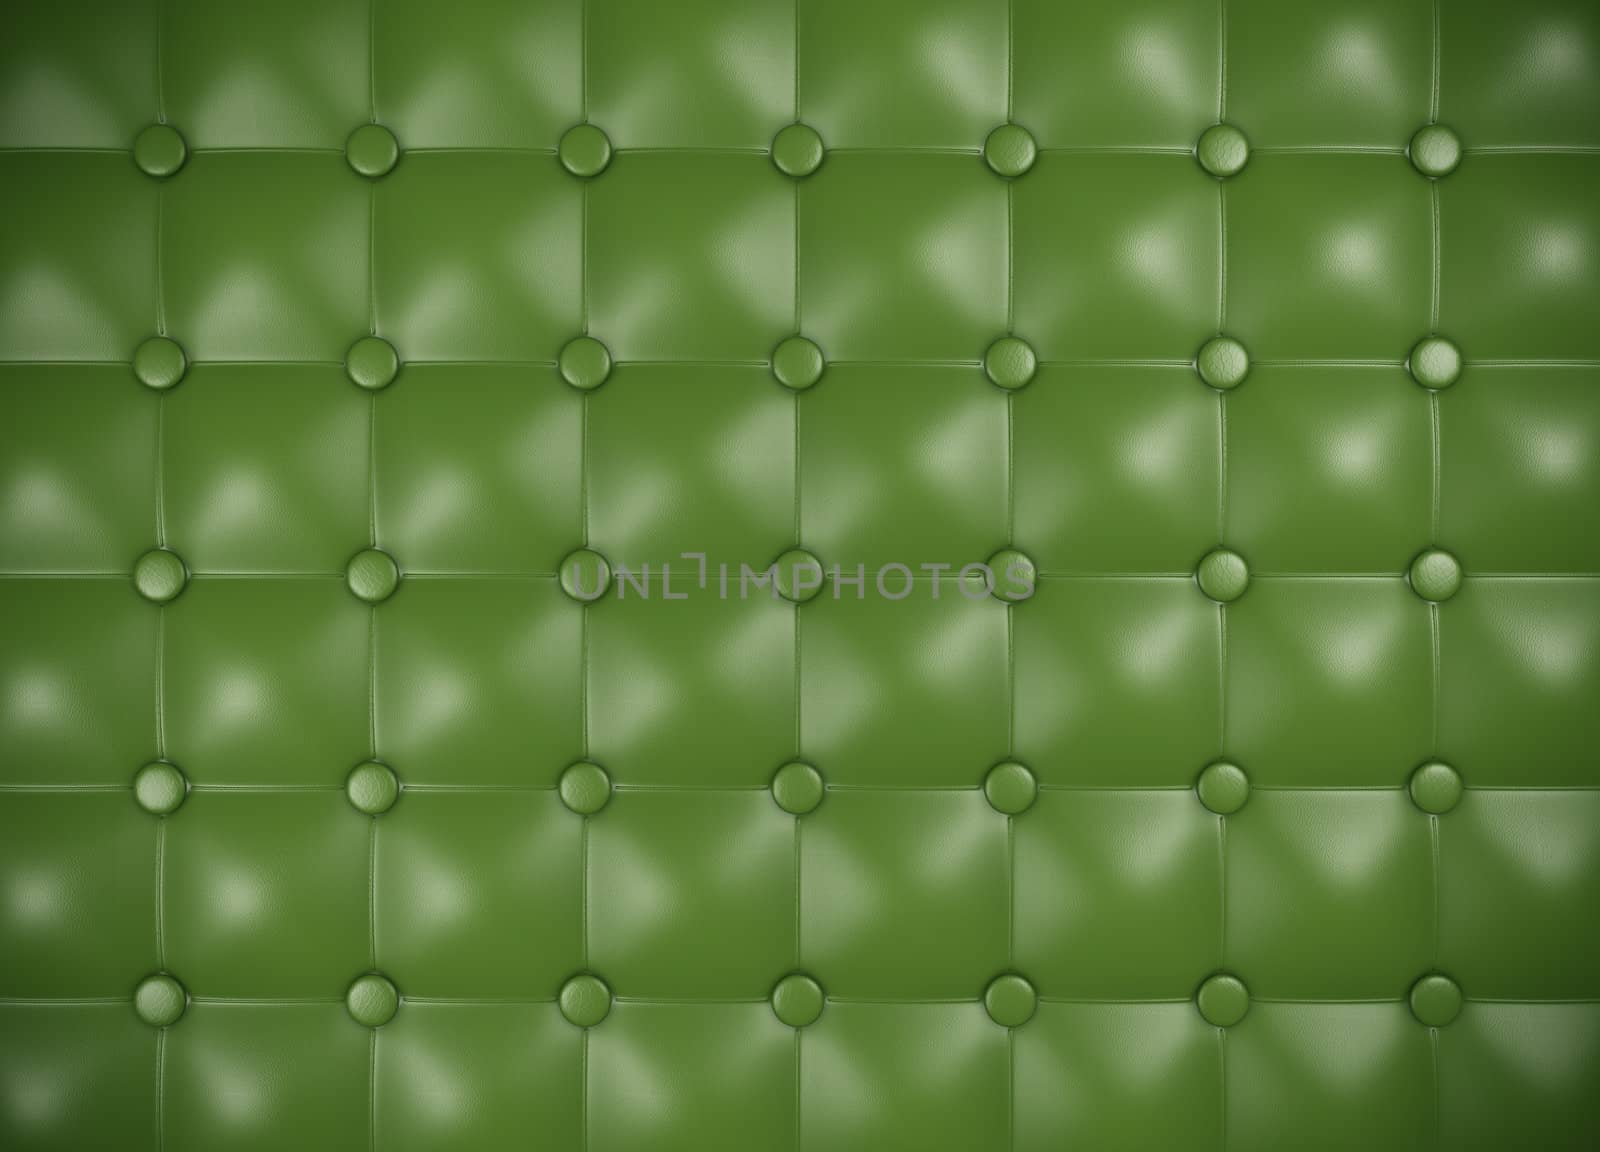 Green leather upholstery pattern. 3D rendered image.
